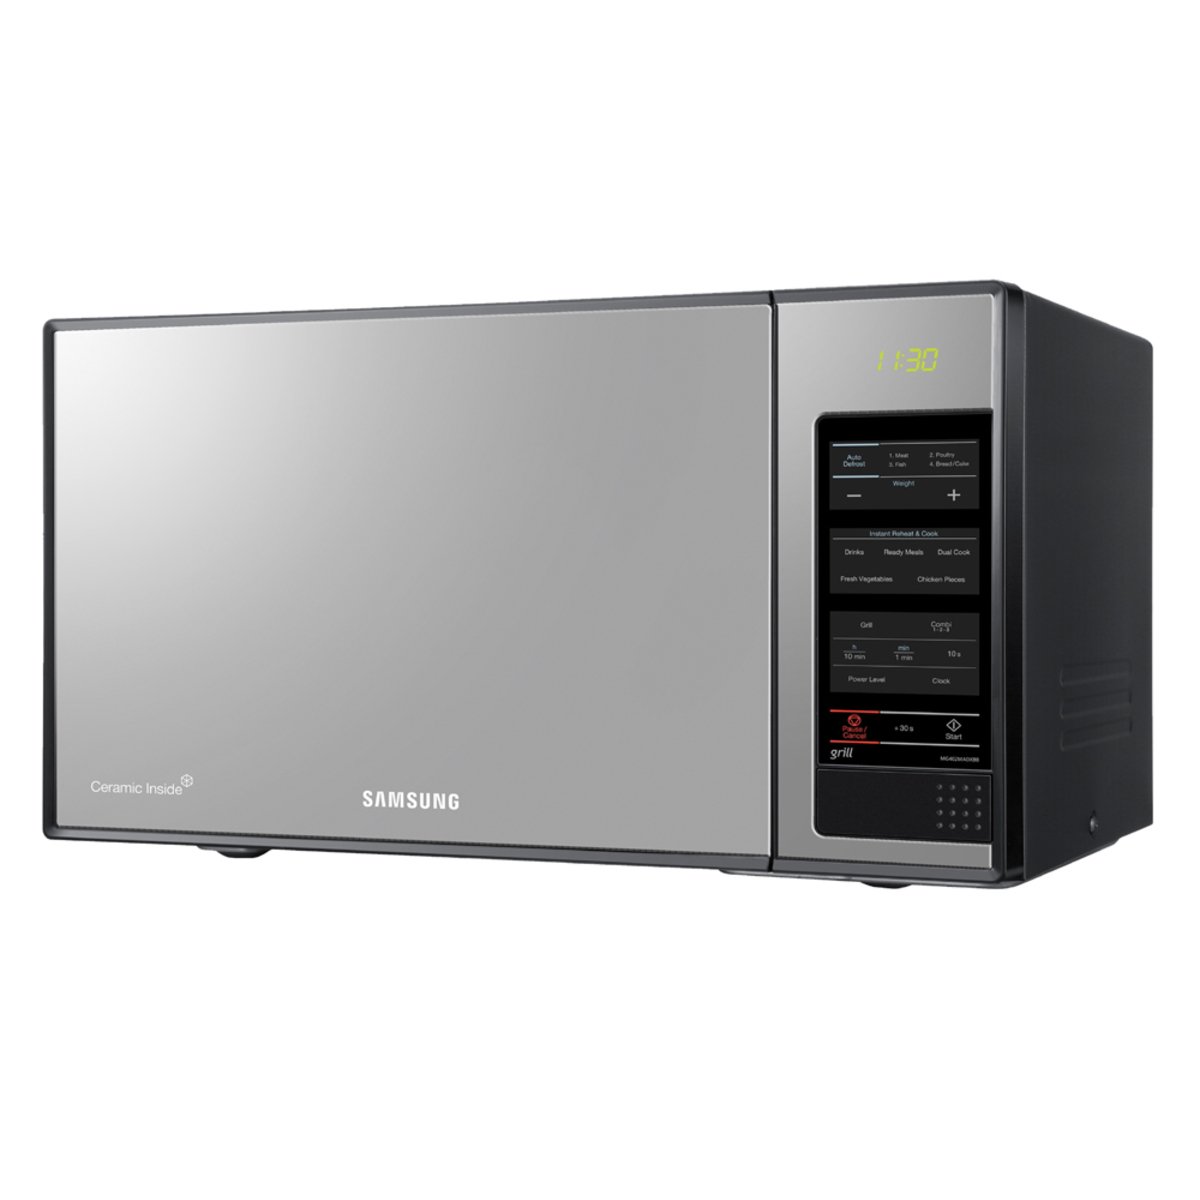 Samsung Microwave Oven with Grill MG402MADXBB 40 Ltr